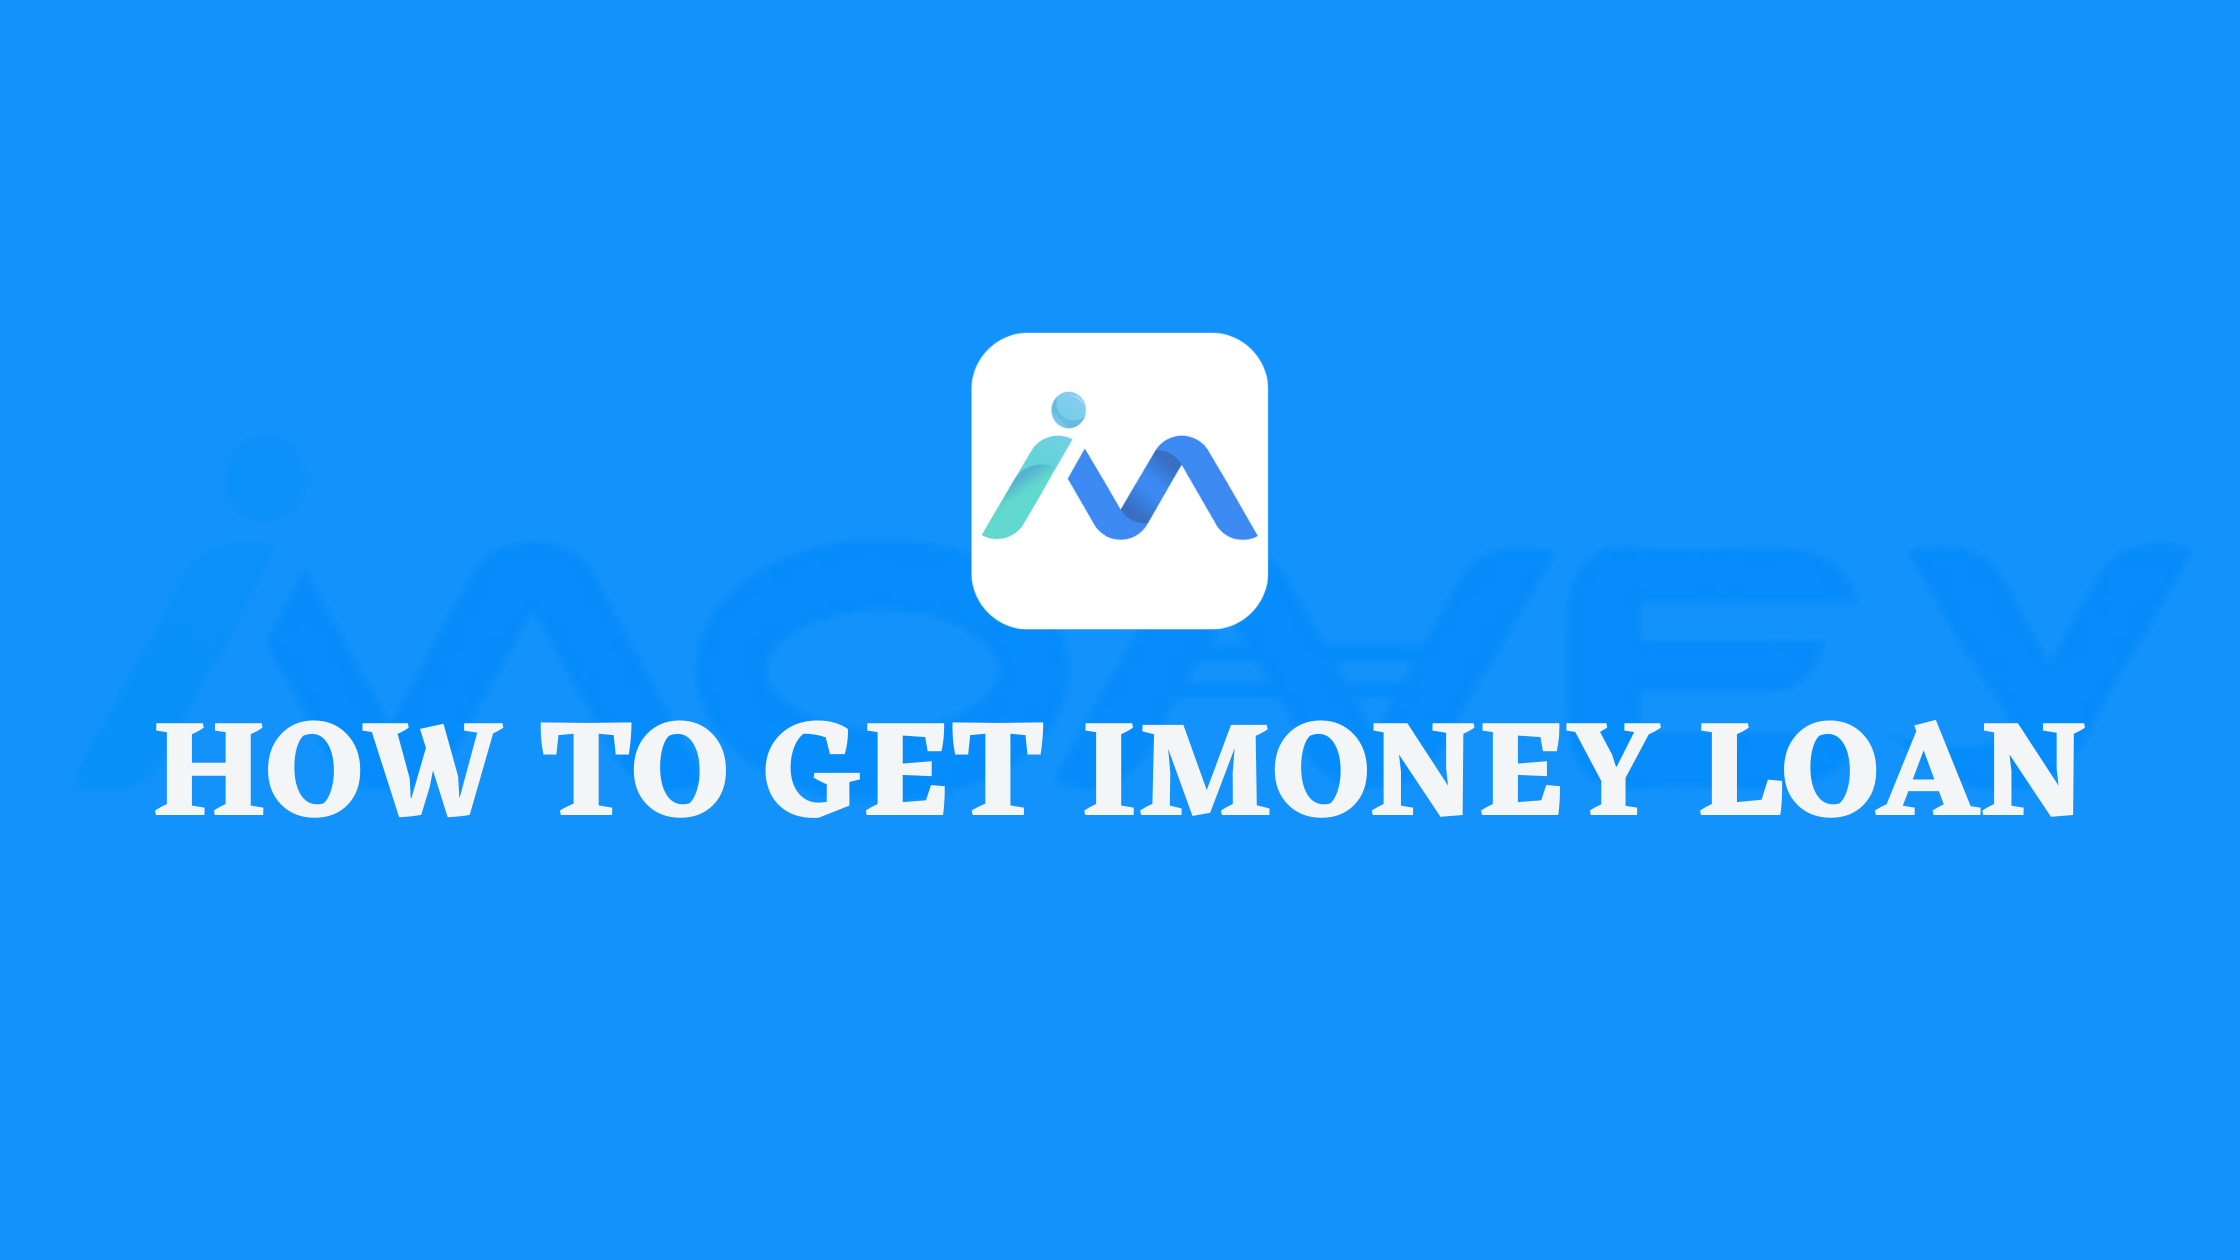 How to get iMoney loan